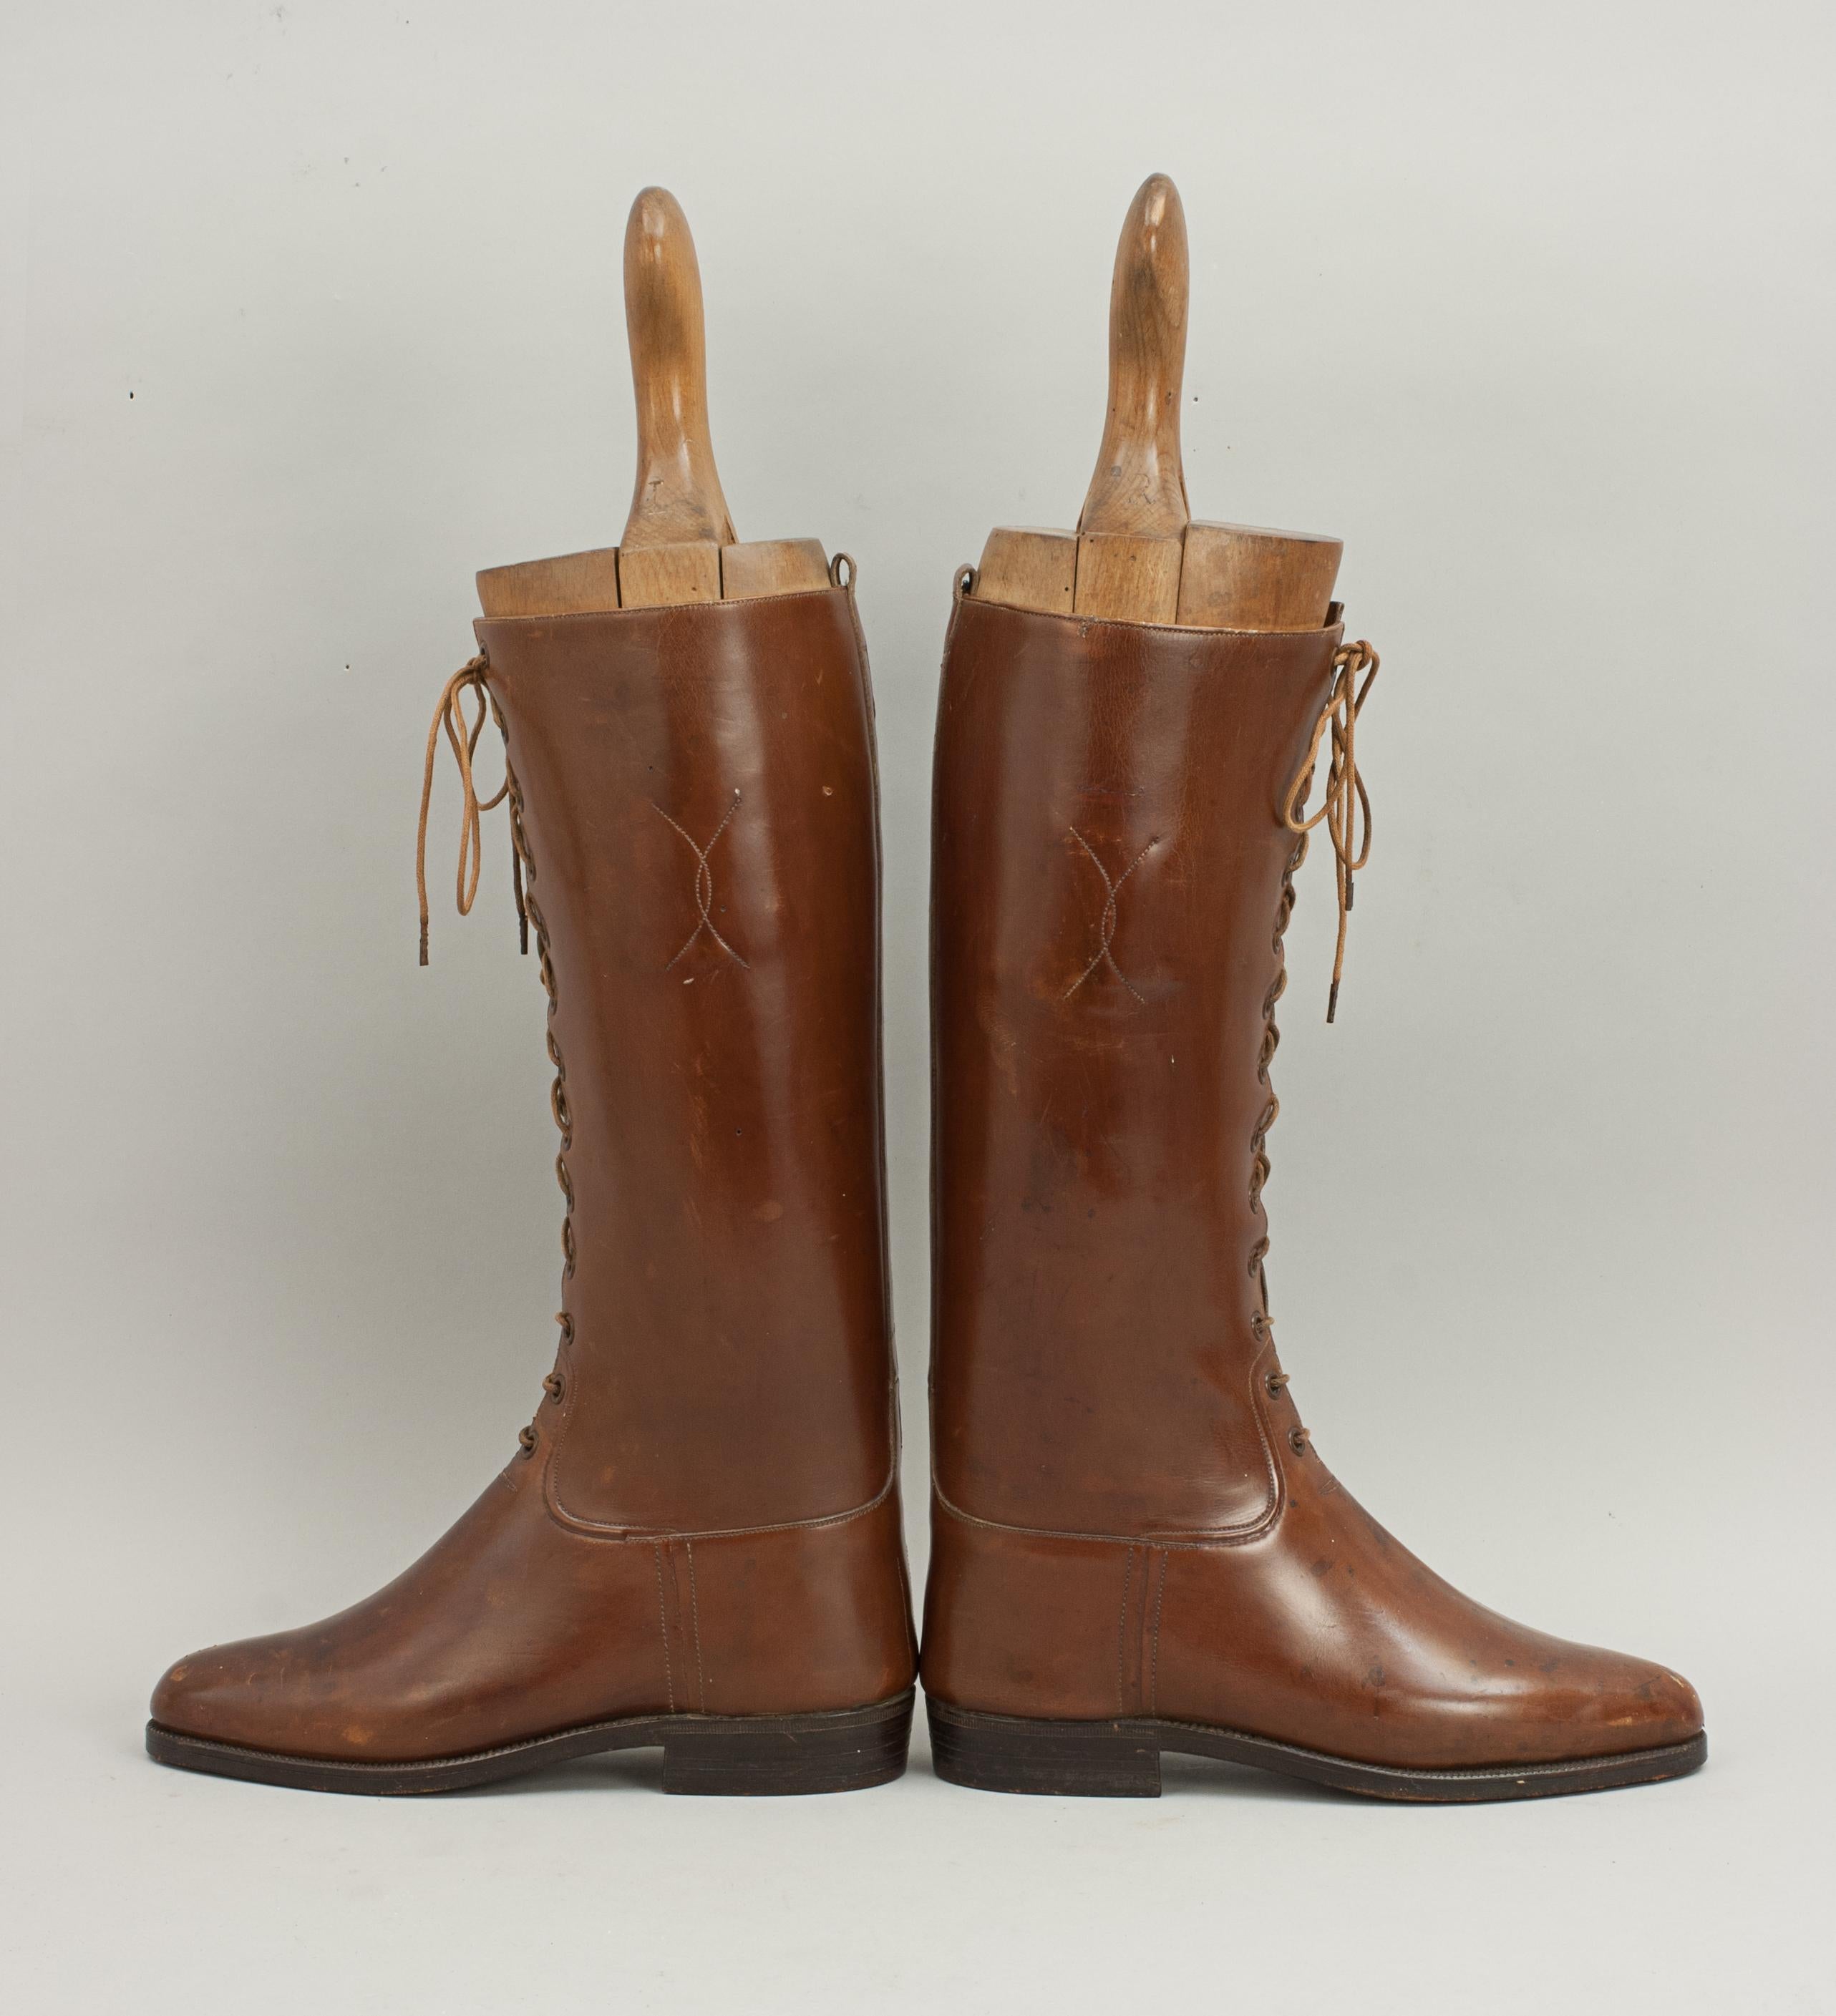 Vintage pair of brown leather ladies lace up riding boots.
A pair of mid calf tan leather front lace up women's riding boots with original beech wood trees. The leather on these boots is in very good condition, the trees have had wood worm (now